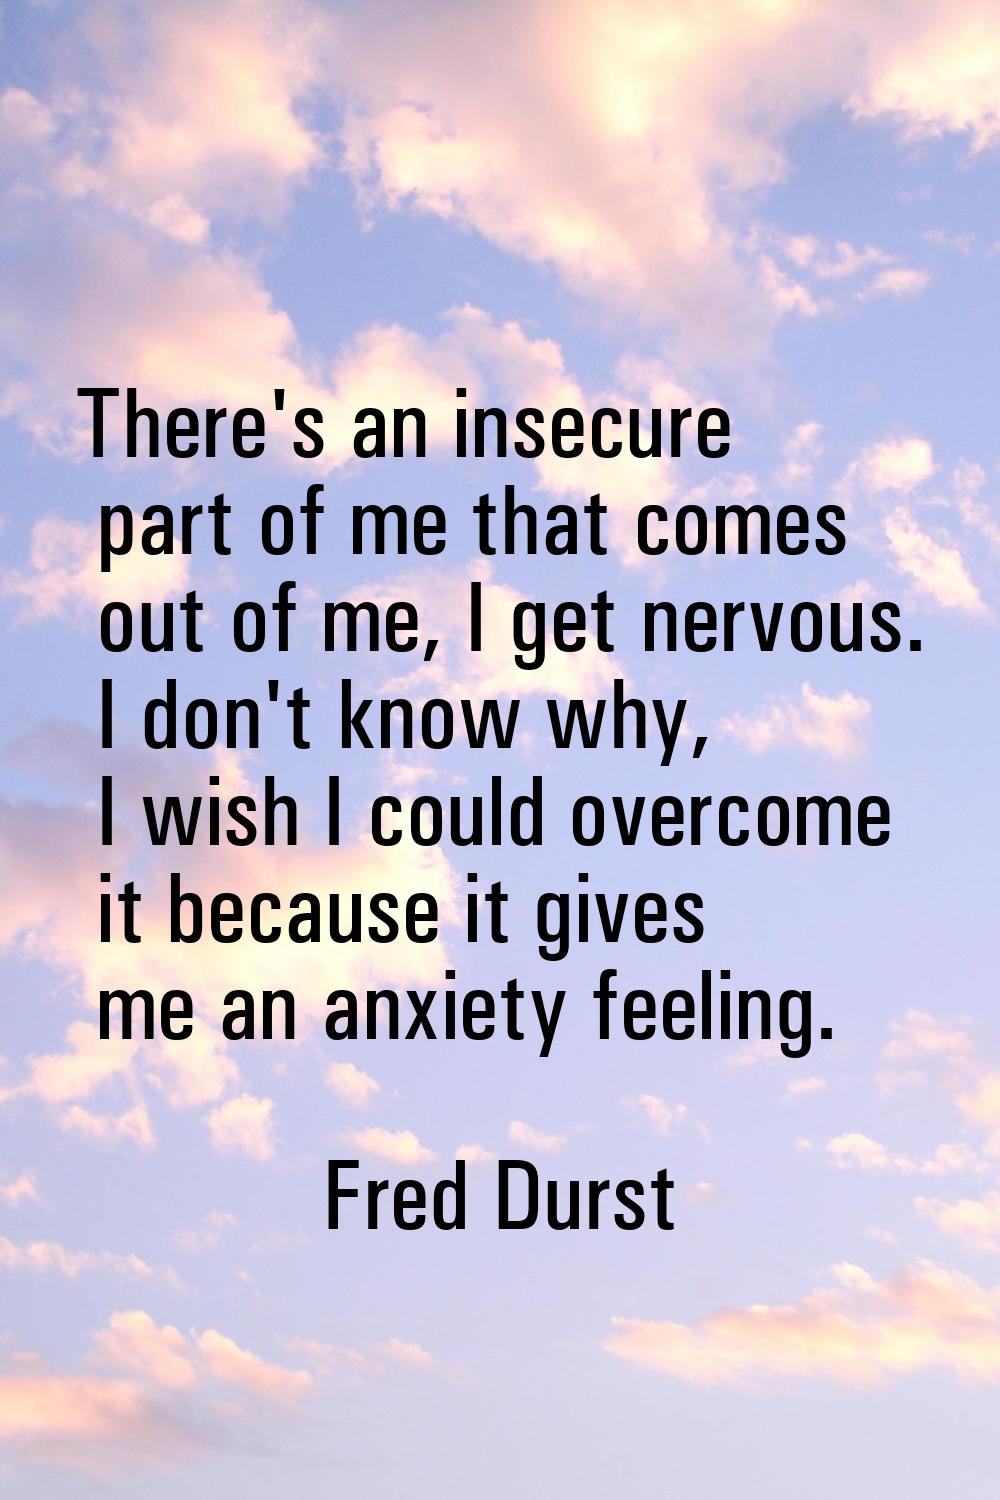 There's an insecure part of me that comes out of me, I get nervous. I don't know why, I wish I coul